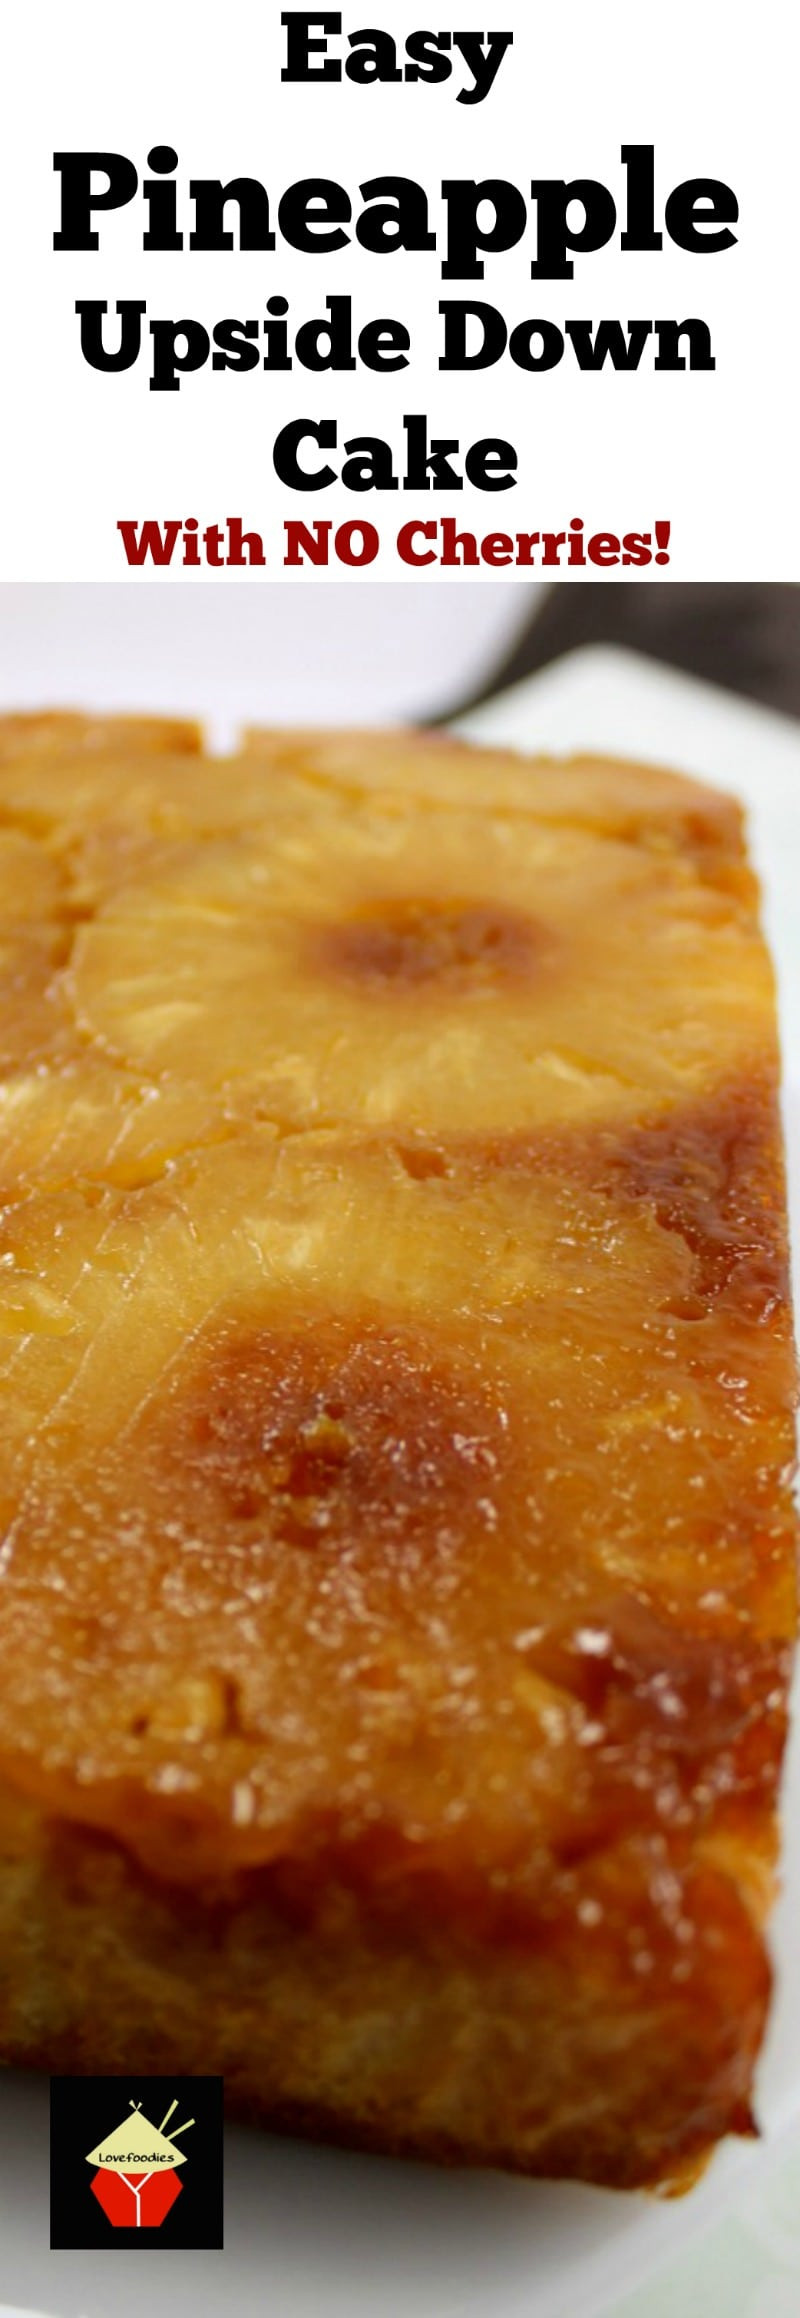 Pineapple Upside Down Cake From Scratch
 Easy Pineapple Upside Down Cake